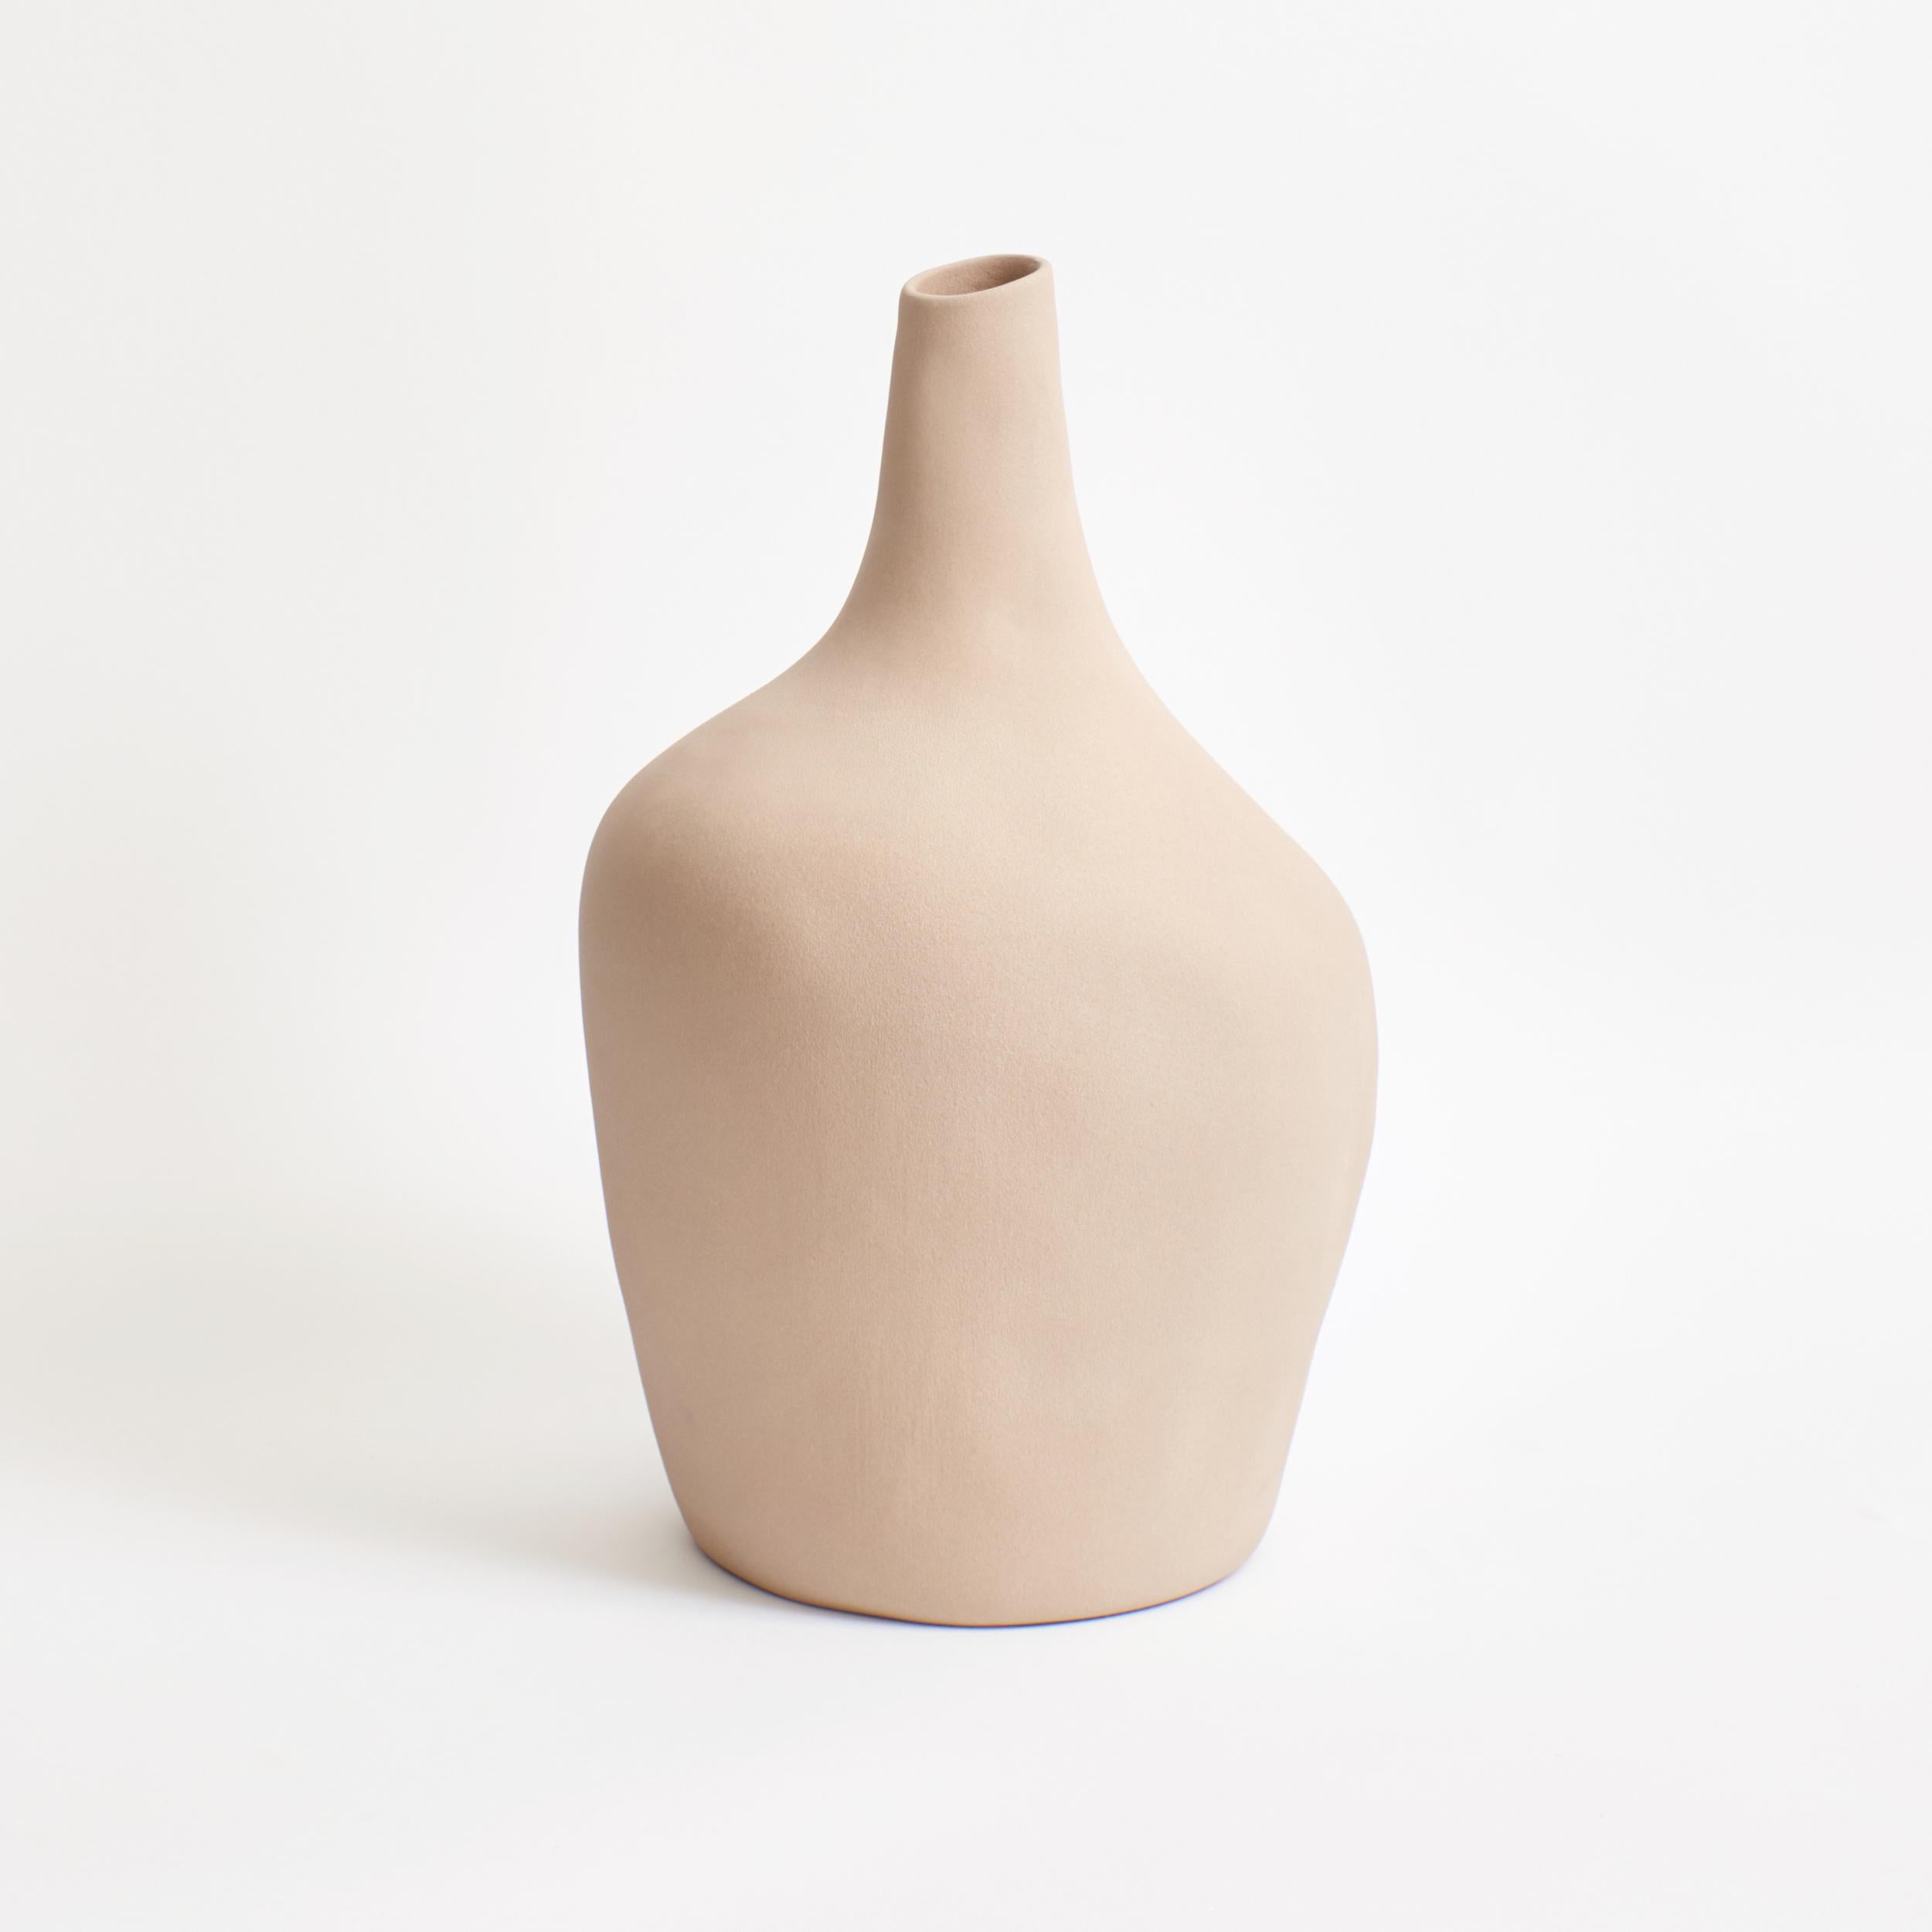 The Sailor vase by project 213A has been designed in 2020 and was launched in 2021.
This glaze has a rough almost sandy texture and comes in a soft beige oat colour
Handmade in Portugal by local craftsmen.
This stoneware vase is sculpted by hand